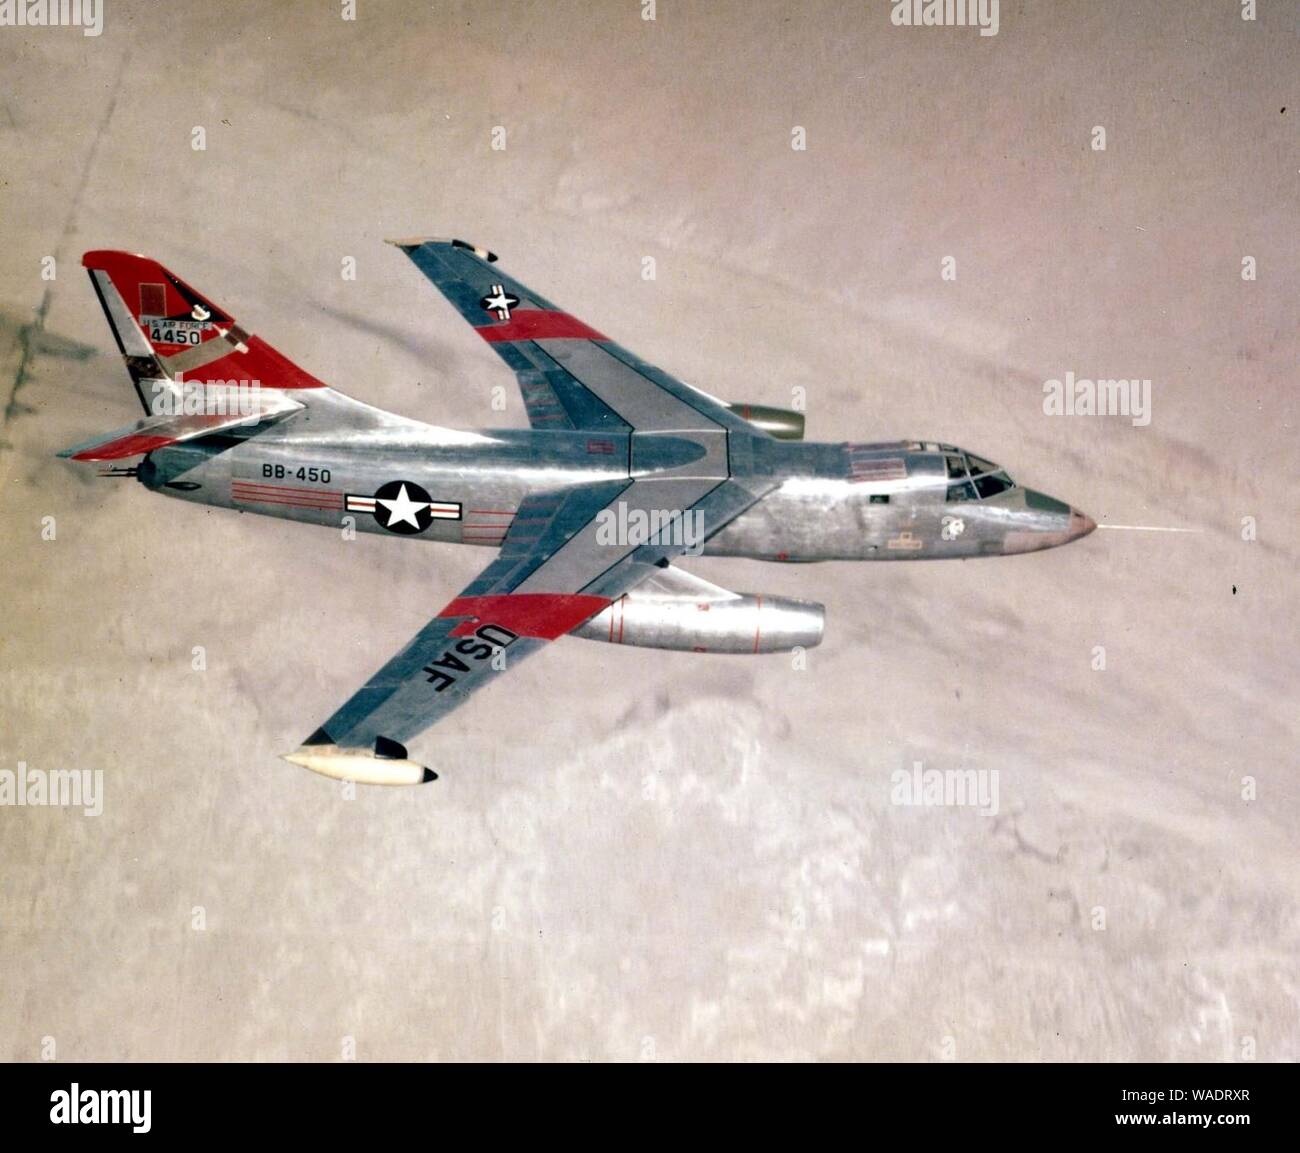 Douglas RB-66C Destroyer in flight (SN 54-450) over Edwards AFB Calif on Feb 19 1957 061102-F-1234P-035. Stock Photo